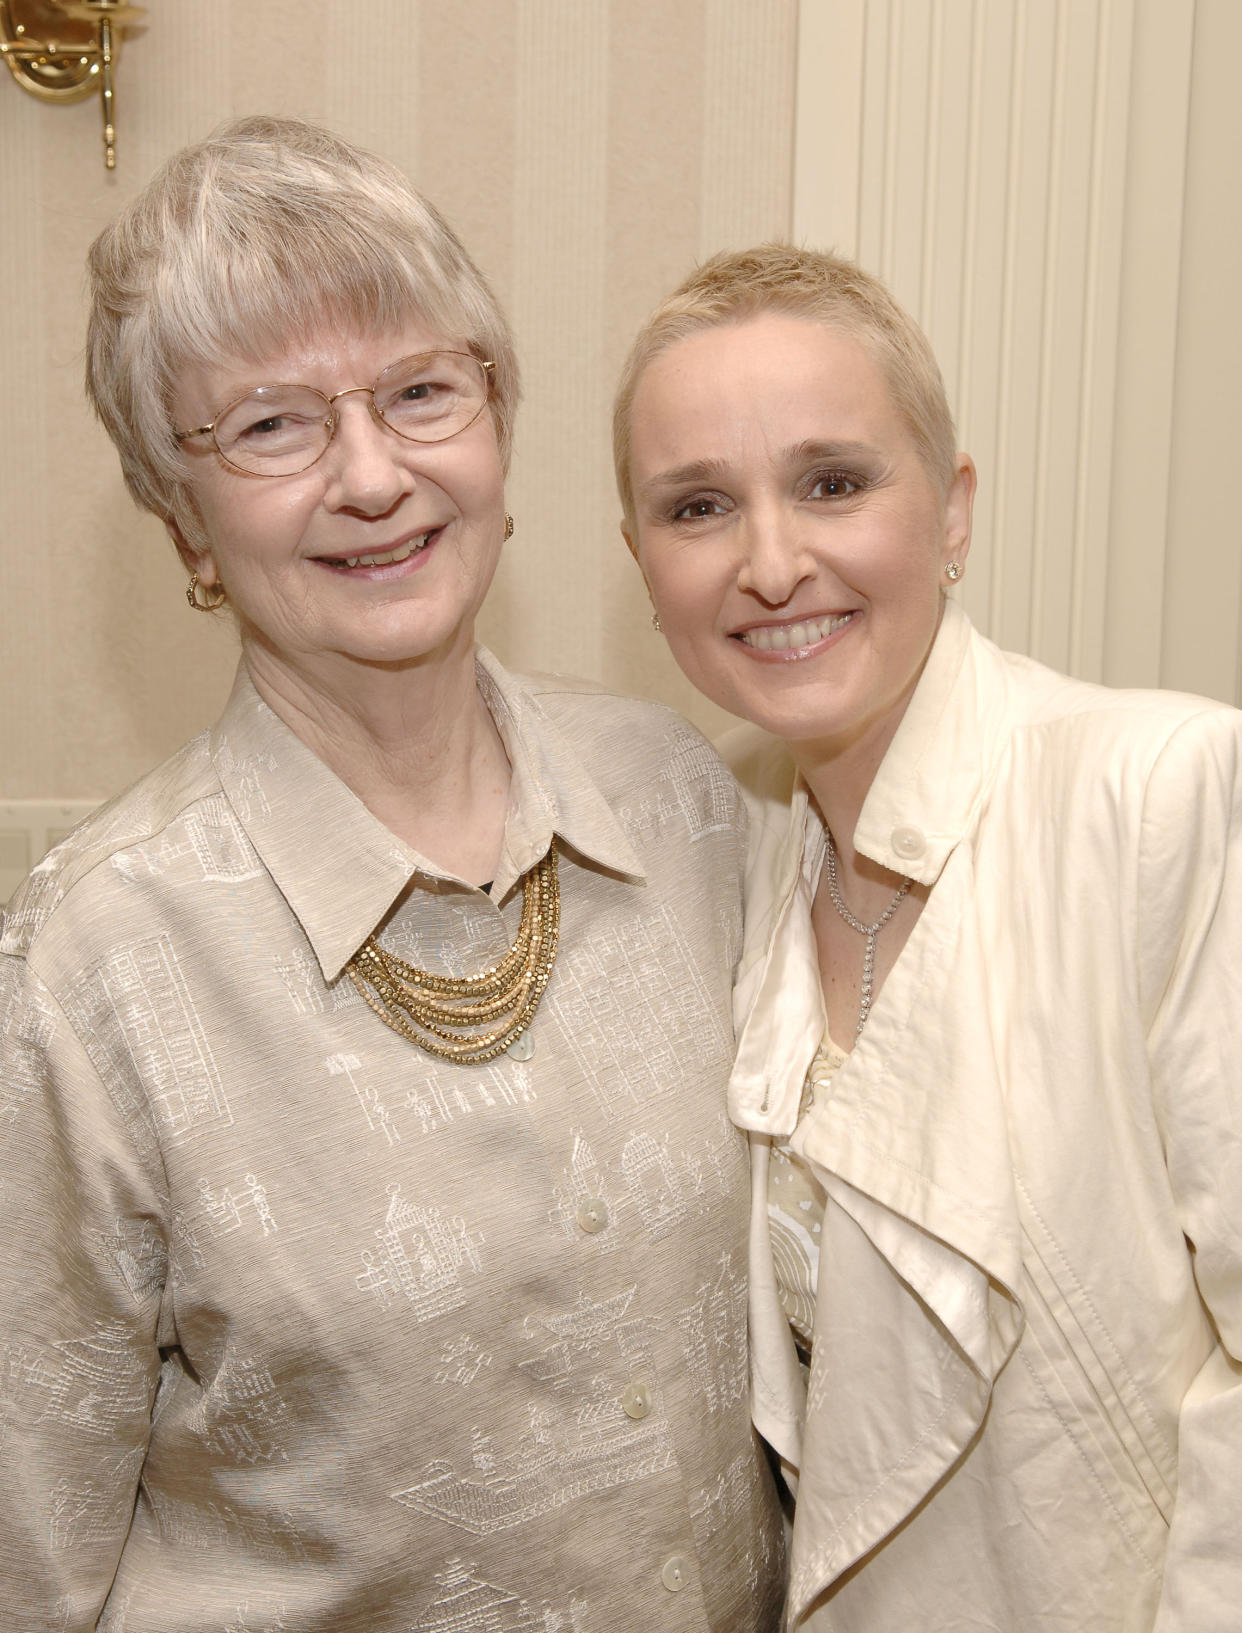  Melissa Etheridge with her mother Elizabeth at the 2005 reception honoring Melissa as one of 